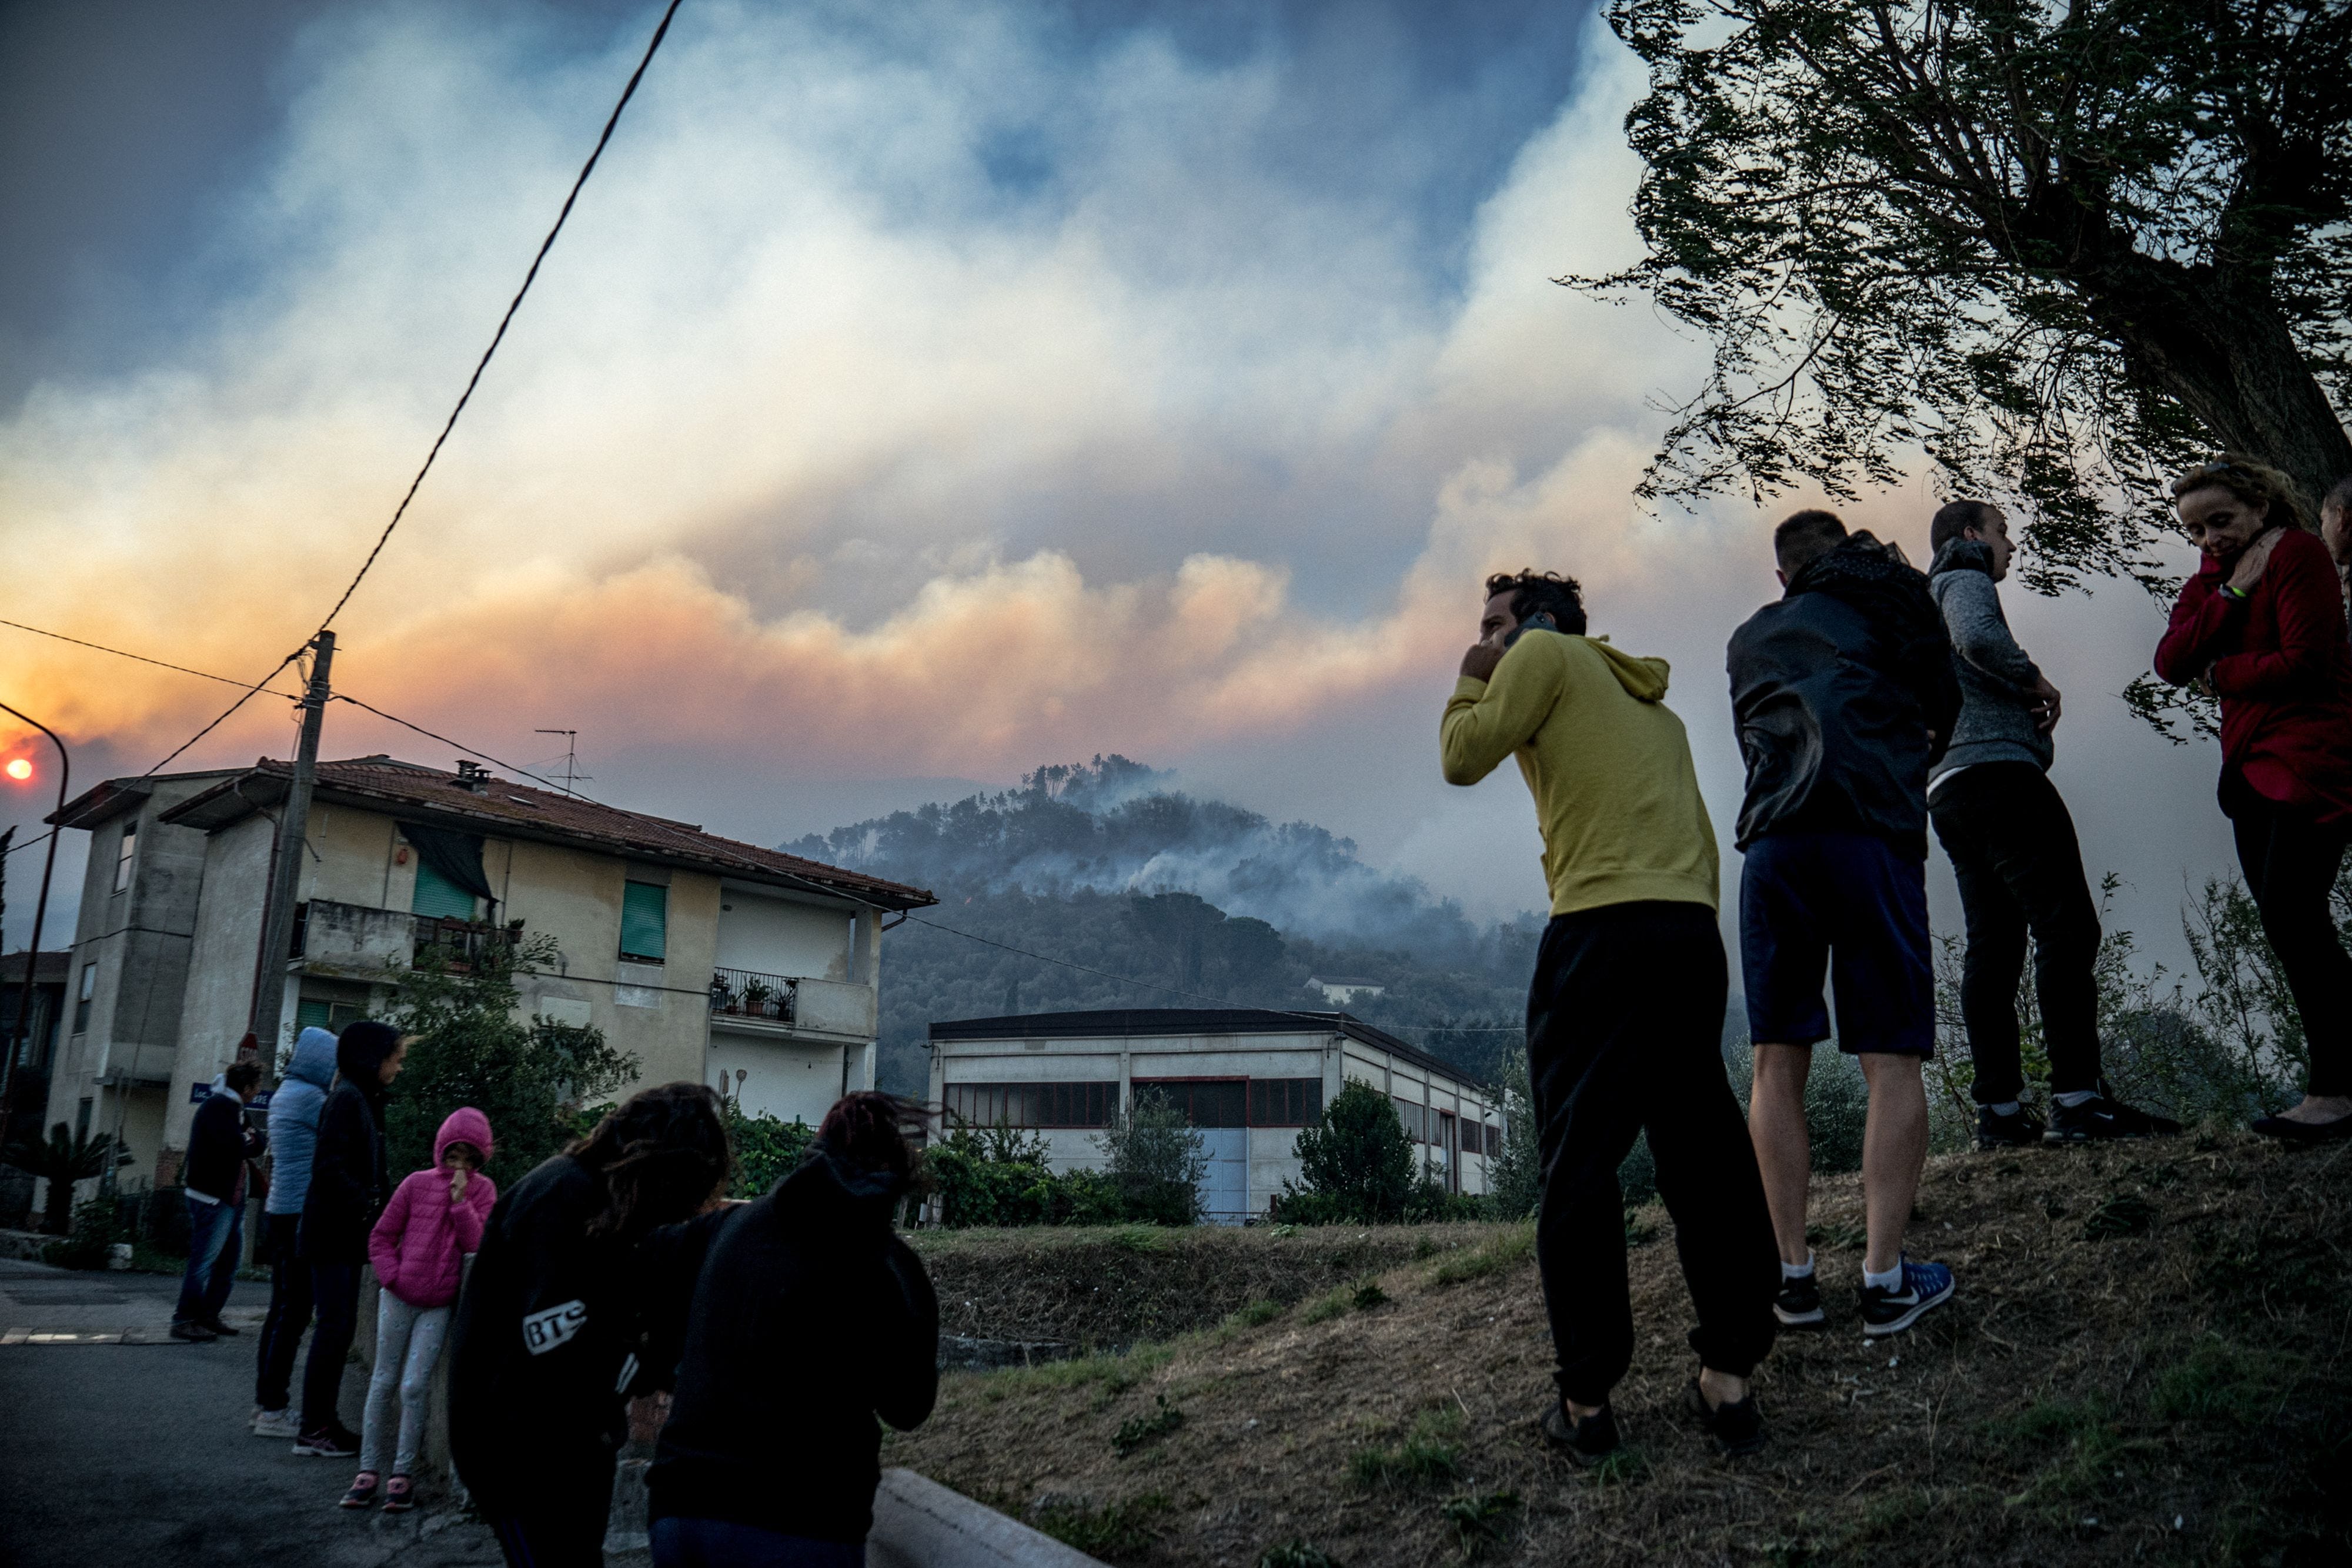 Inhabitants look at the fire on the nearby hills in Calci, near Pisa in the Tuscany region of Italy on Sept. 25, 2018.  A very extended fire is burning in the hills north of Pisa. Hundreds had to leave their home during the night.